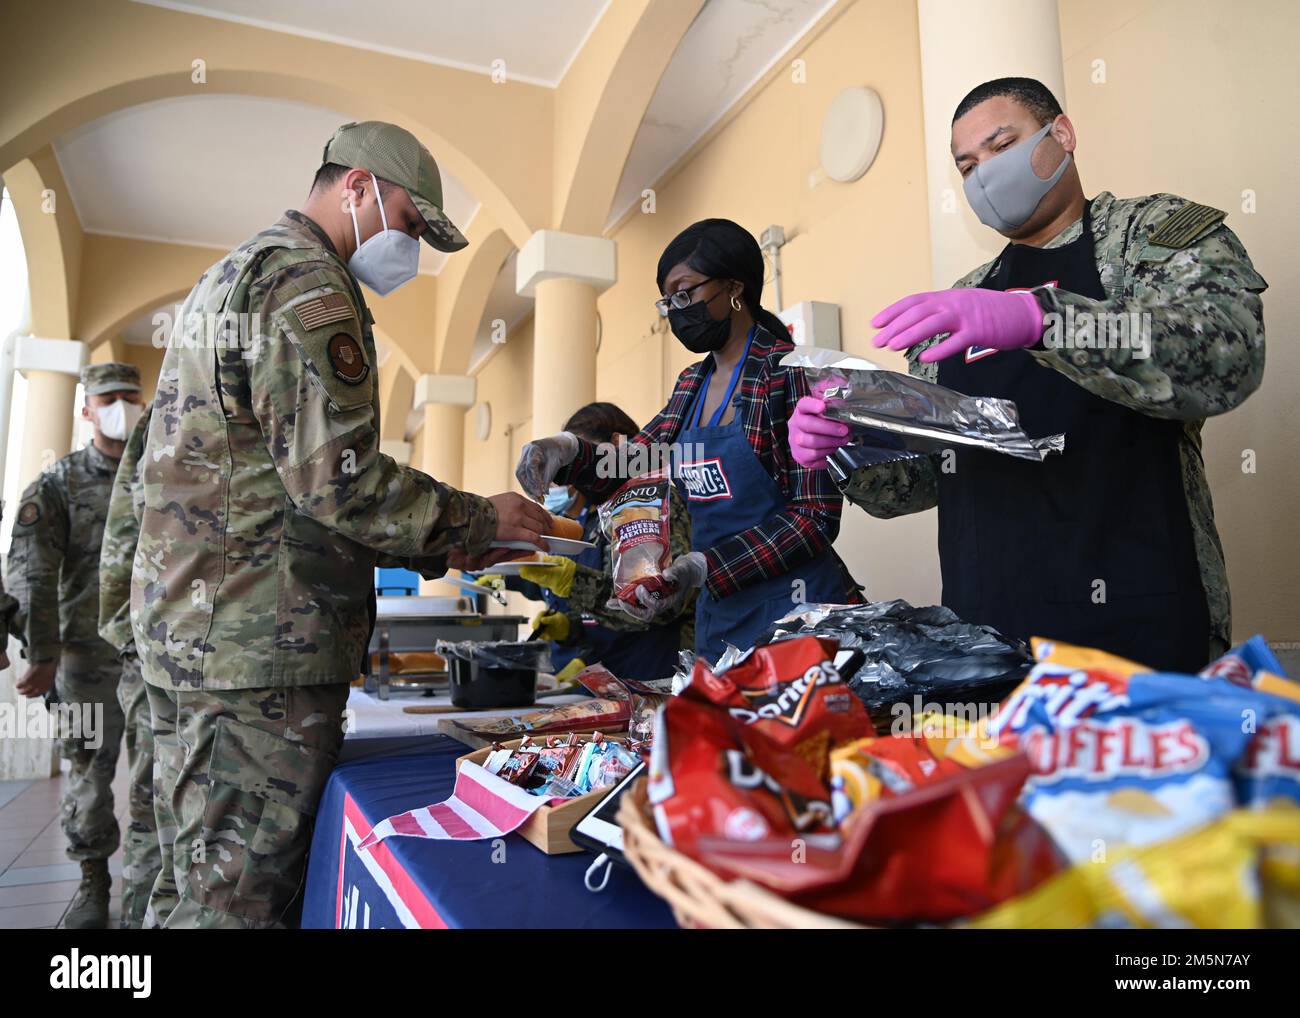 220329-N-OX321-1037 NAVAL AIR STATION SIGONELLA, Italy (March 29, 2022) – Senior Chief Intelligence Specialist Robert Holder from St. Thomas, Virgin Islands, and U.S. Army Corporal Asia Bradley from Sumter, N.C., serve lunch at the USO Troop Lunch to help raise awareness for the Chief’s Birthday at Naval Air Station Sigonella on March 29, 2022. NAS Sigonella’s strategic location enables U.S., allied, and partner nation forces to deploy and respond as required, ensuring security and stability in Europe, Africa, and Central Command. Stock Photo